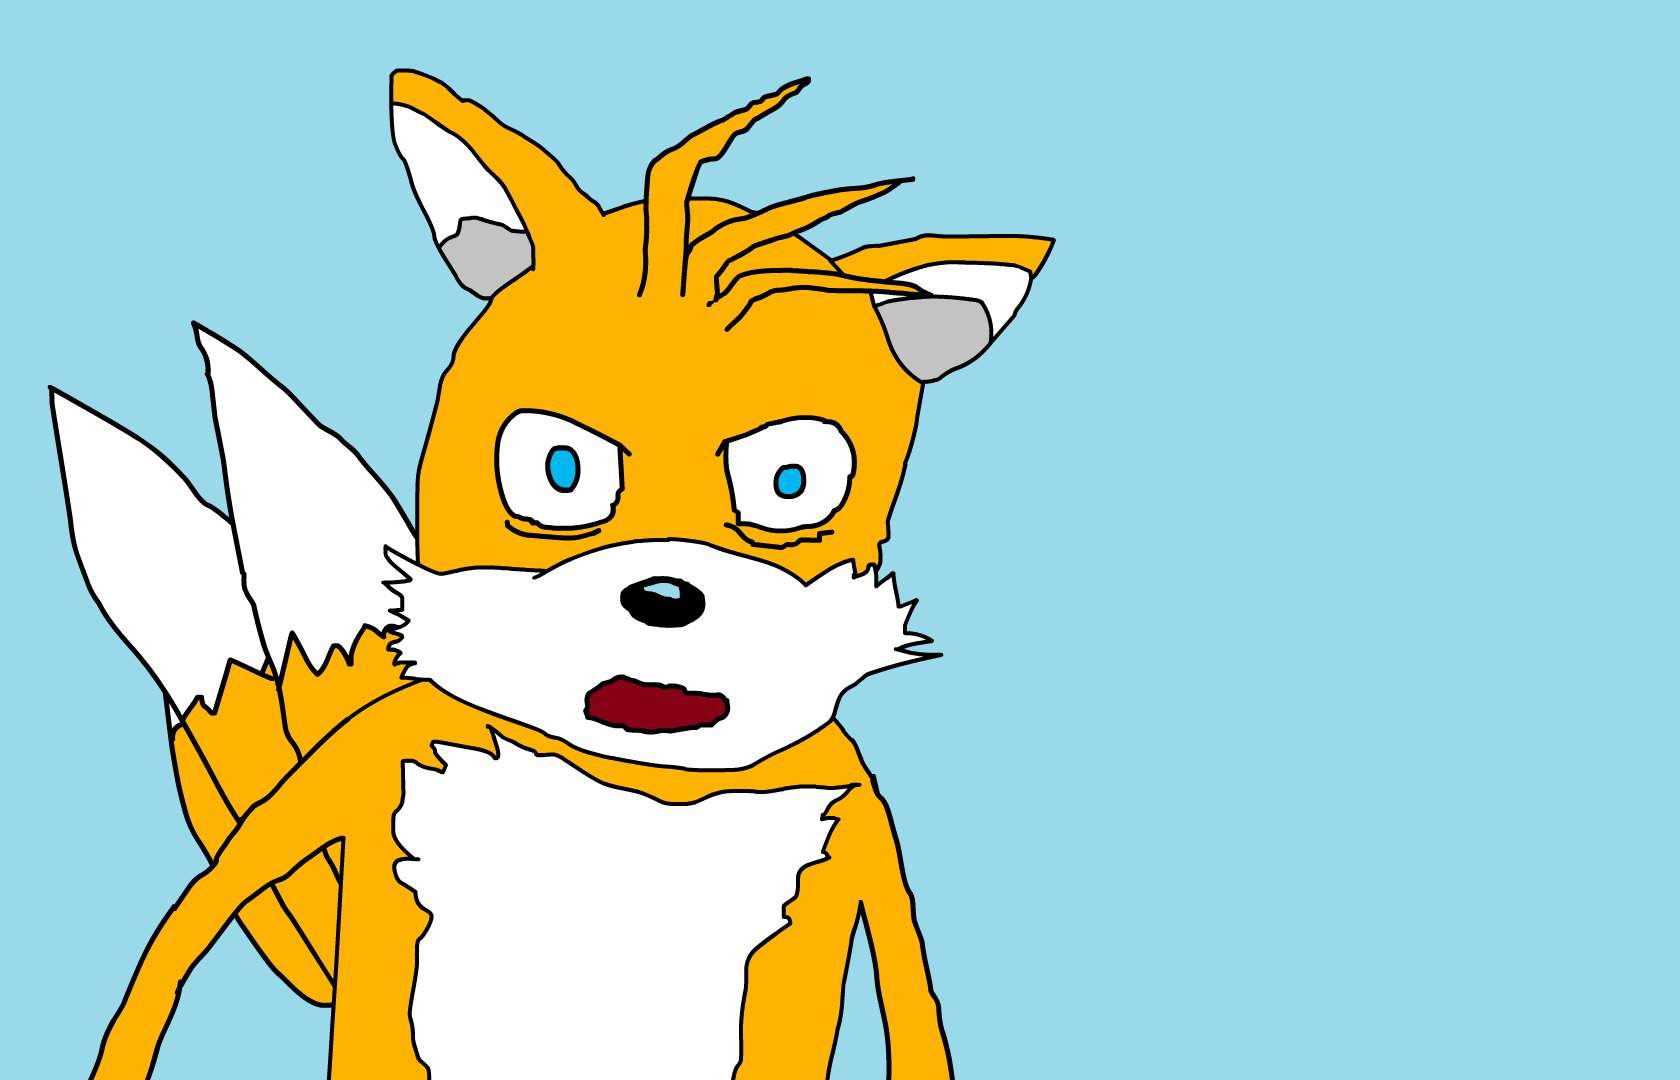 I redrew the iconic meme face from Tails gets Trolled. 